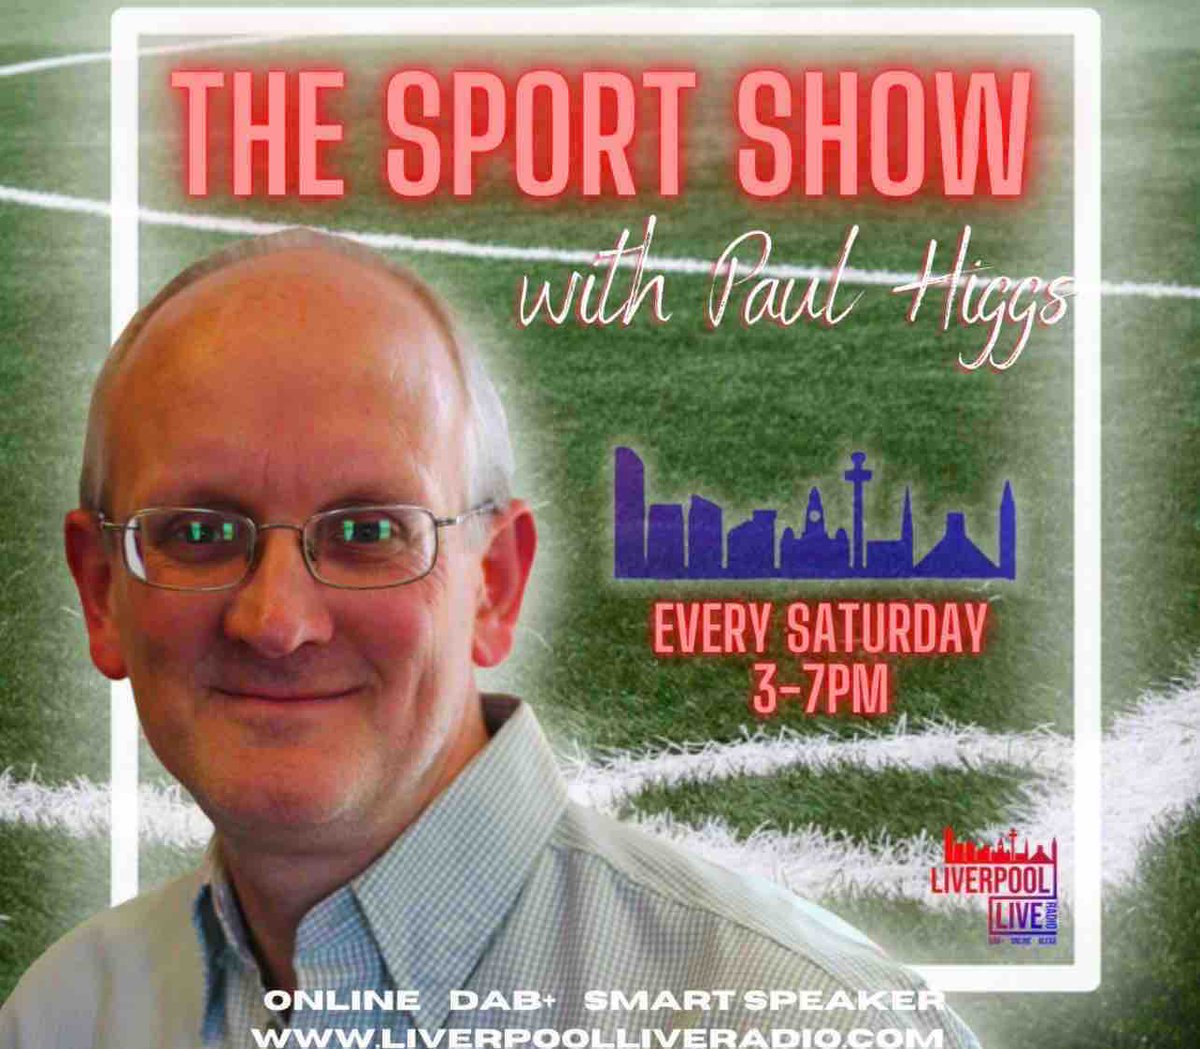 Liverpool Live Sport will keep you updated on the penultimate weekend of Premier League action this afternoon with @PaulHiggsRadio. #EFC host Sheffield Utd at Goodison Park, whilst we’ll also look ahead to #LFC’s visit to Aston Villa on Monday night. Listen LIVE from 3pm.